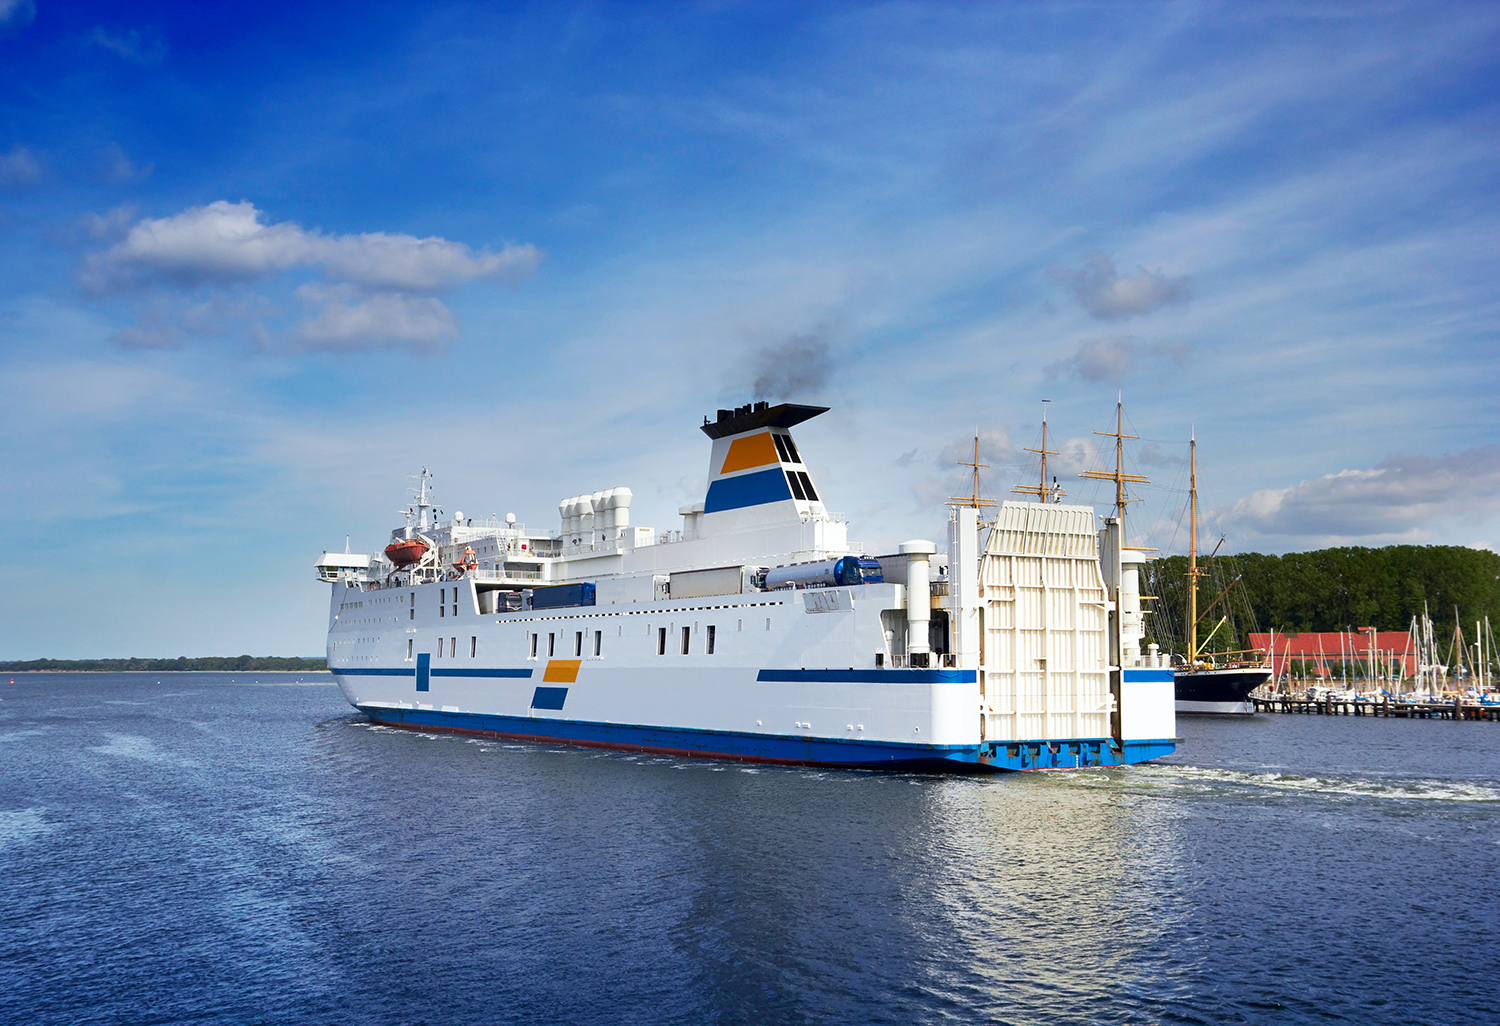 Large ferries commonly use a dual diesel-powered propeller shaft propulsion, with four diesel engines driving two propeller shafts. (Image Source: AdobeStock_133706927).